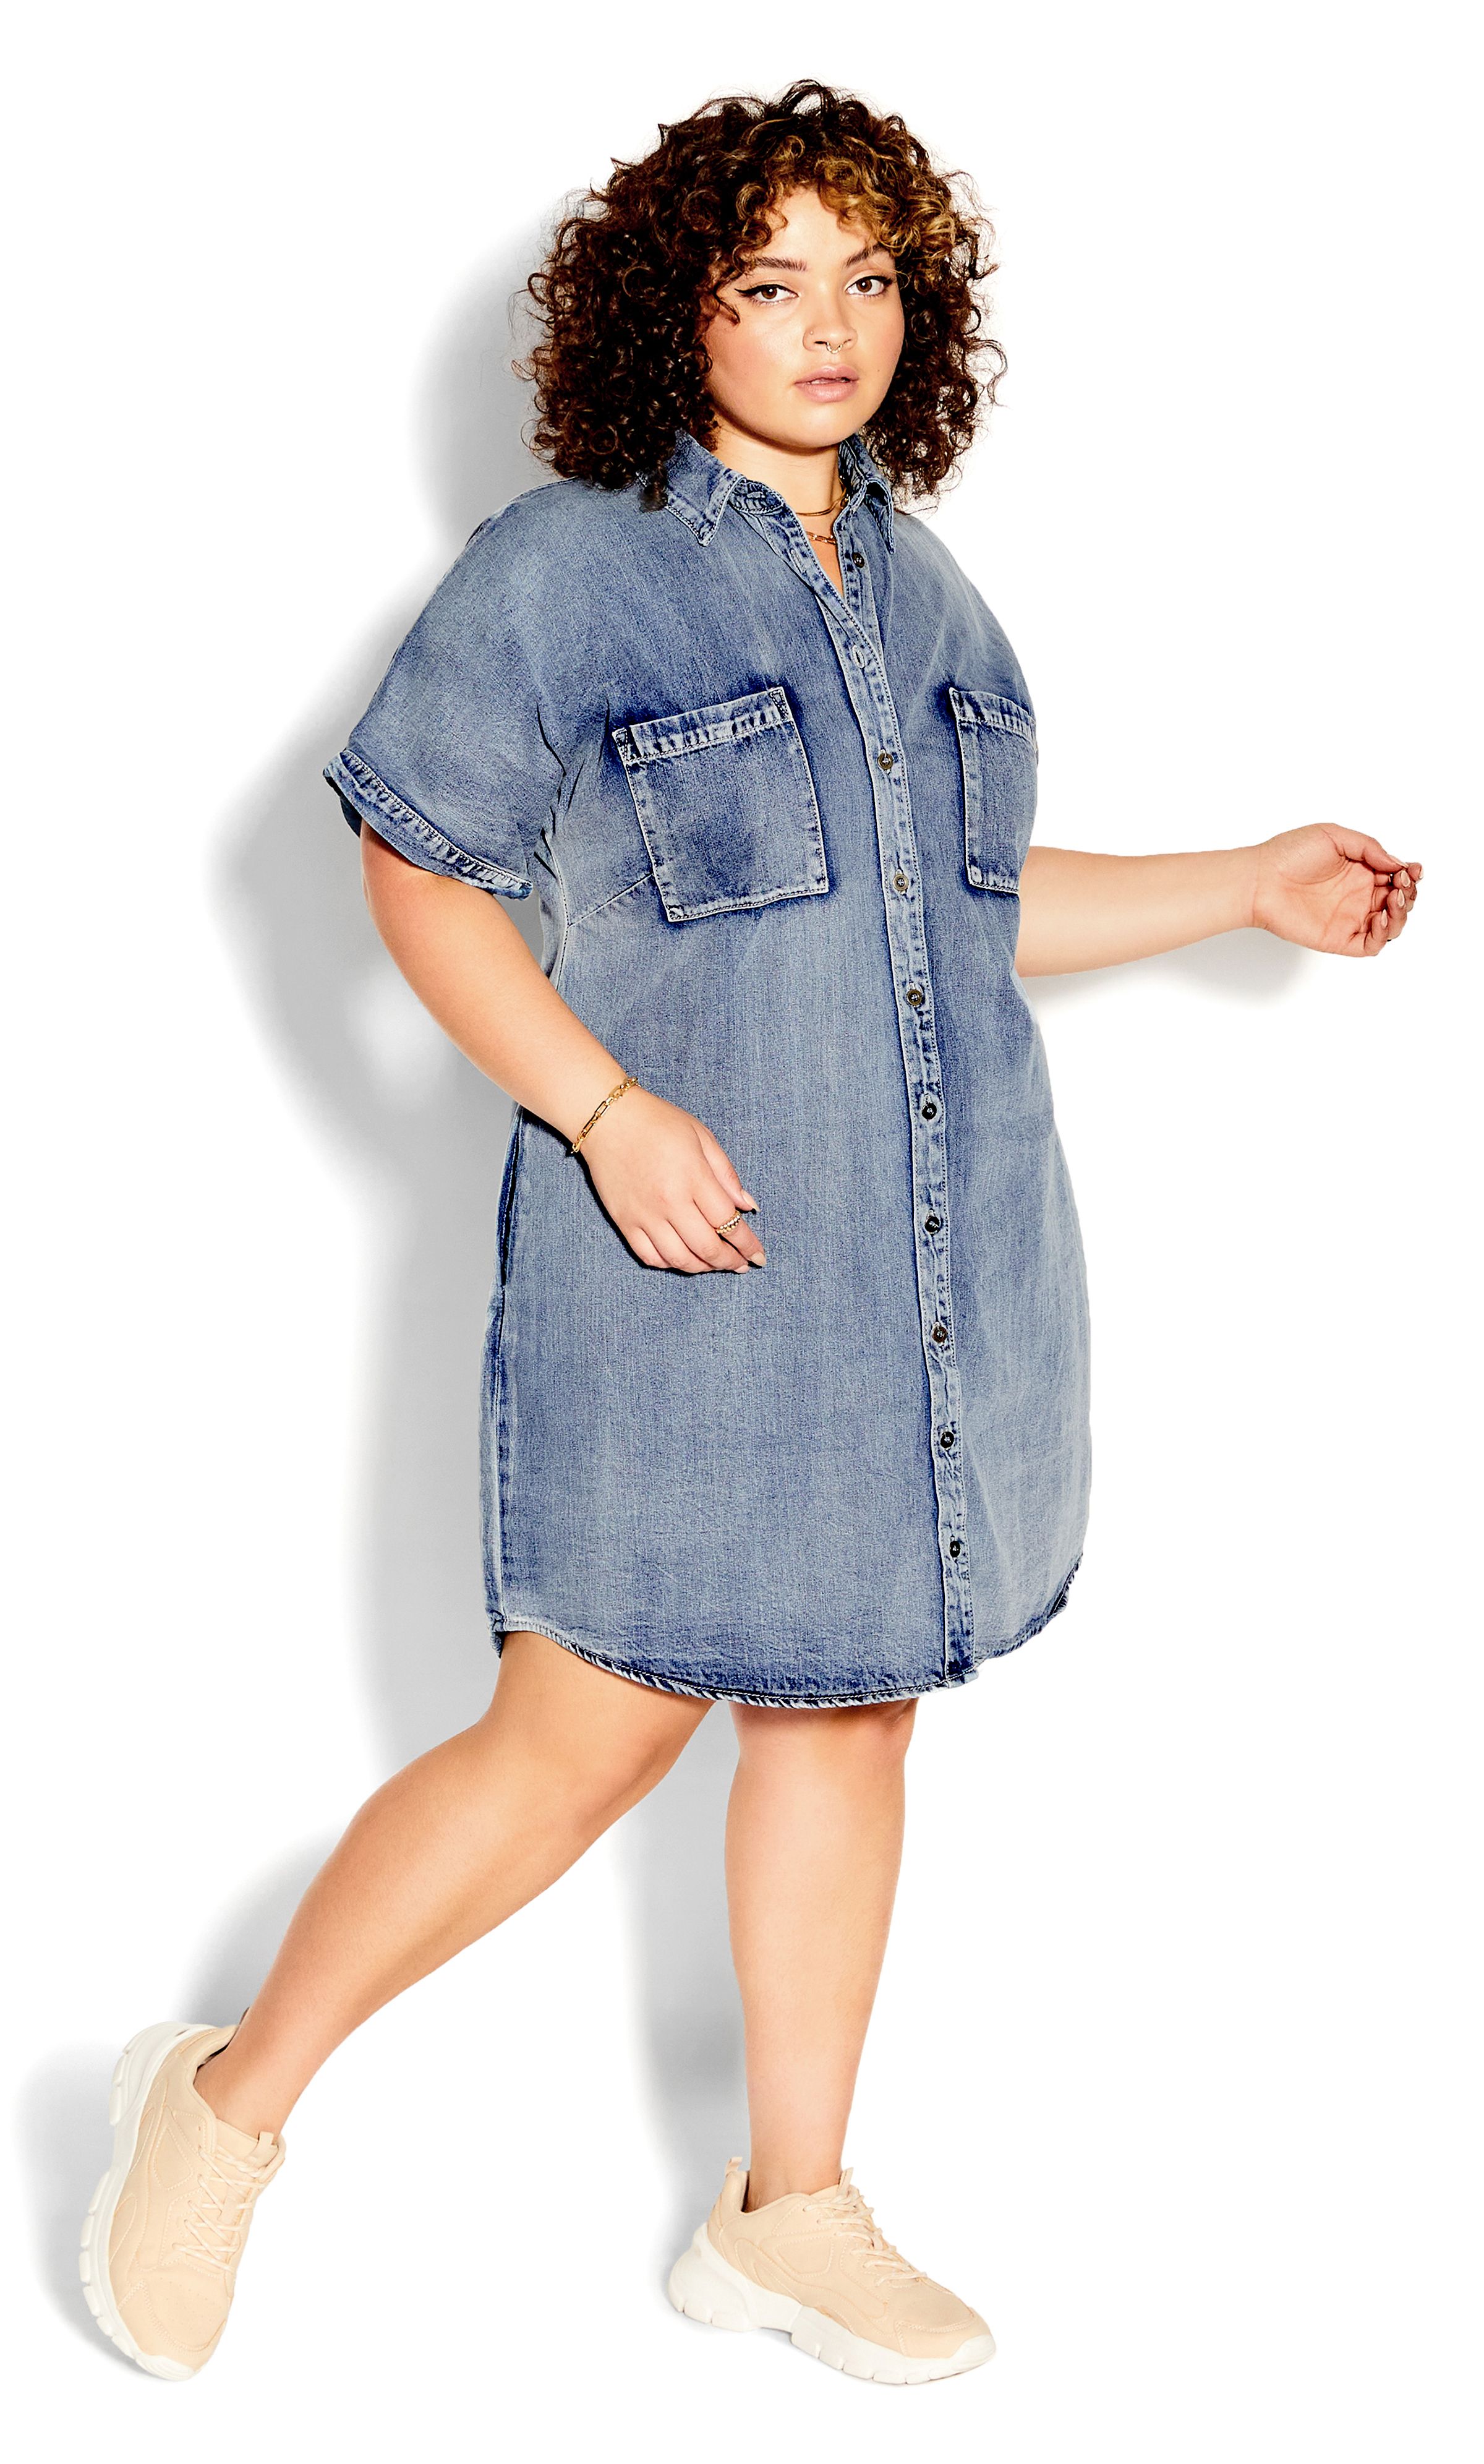 Elevated by a 100% Cotton denim fabrication, the Denim Sleek Dress is a sought after summer staple. It flaunts a workable button up front as well as handy side pockets to hold your everyday essentials. Key Features Include: - Collared neckline - Short cuffed sleeves - Buttoned front - Two breast pockets - Two side pockets - Breathable 100% Cotton fabrication - Unlined - Mini length Add ankle boots and oversized sunglasses for a mega cool street style aesthetic.